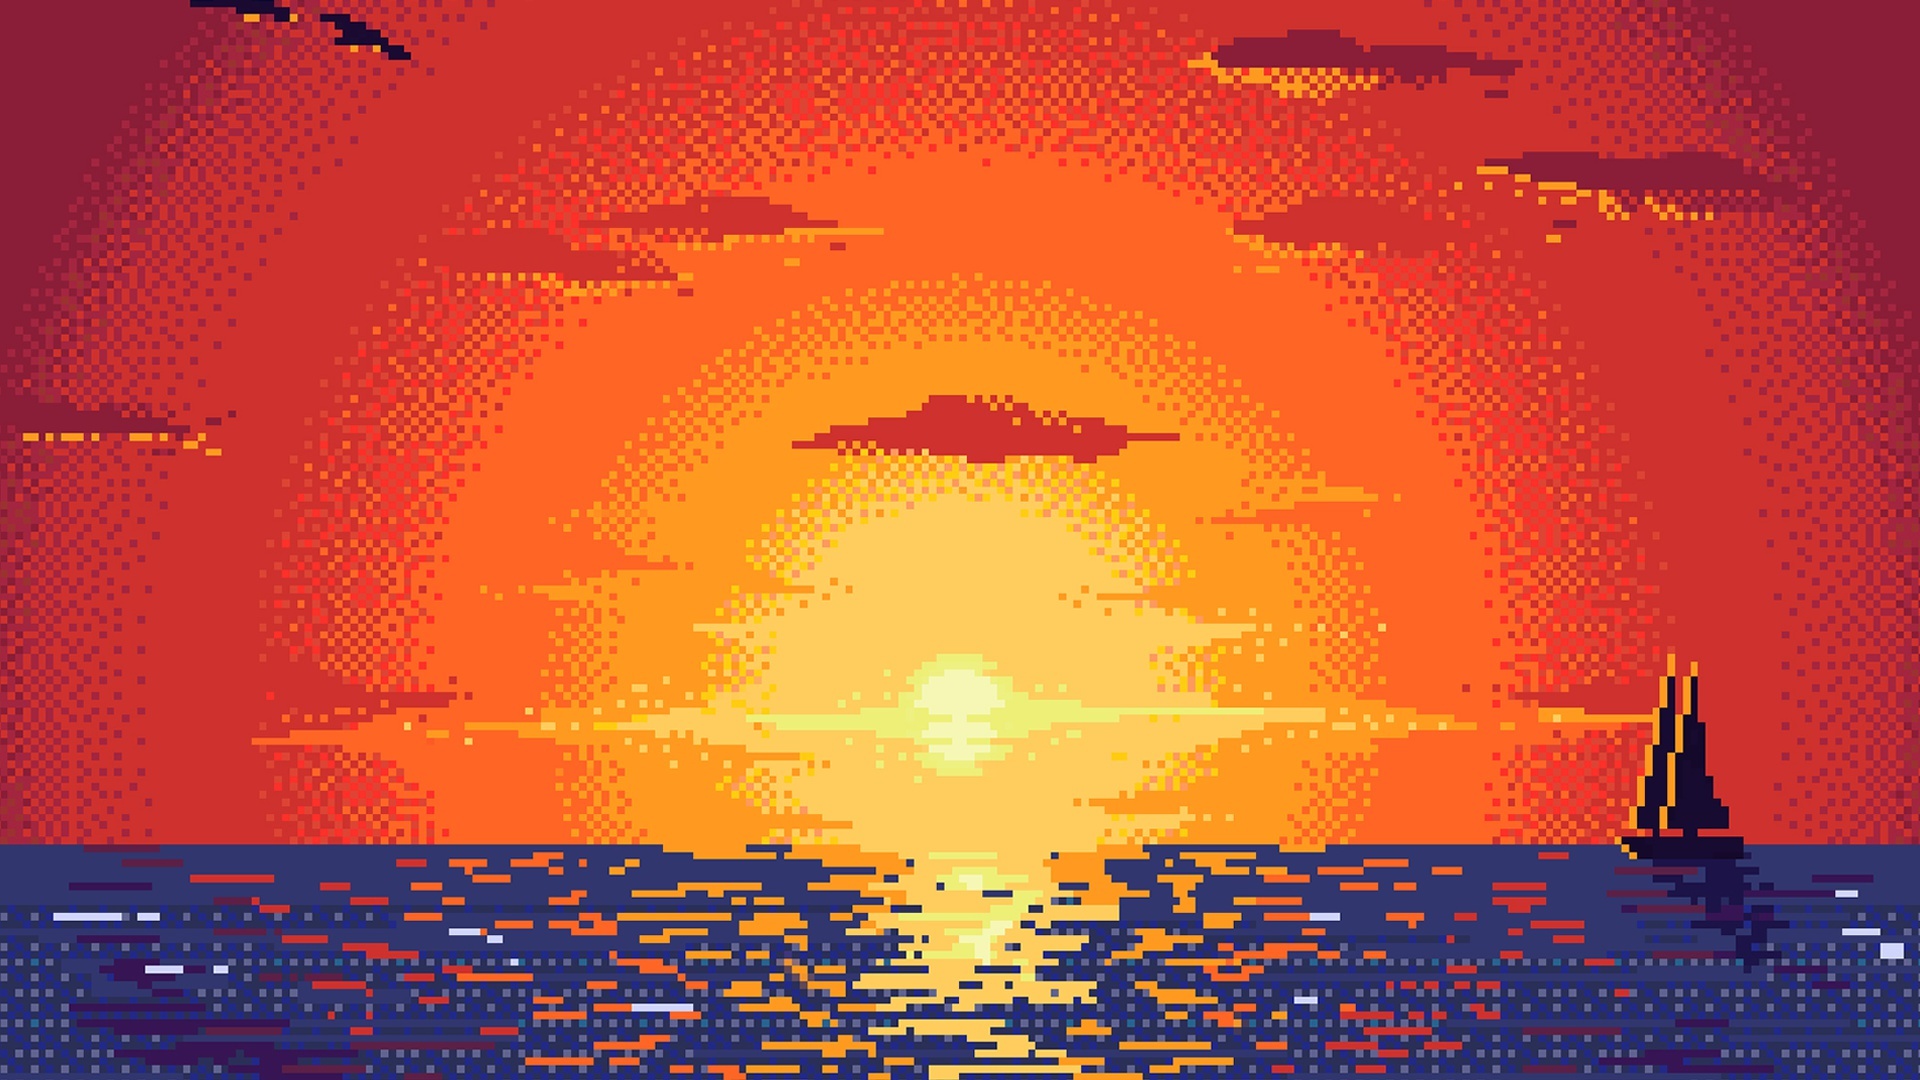 Pixel Sunset Wallpaper Hd Wallpaper Wallpaper Flare | Images and Photos ...